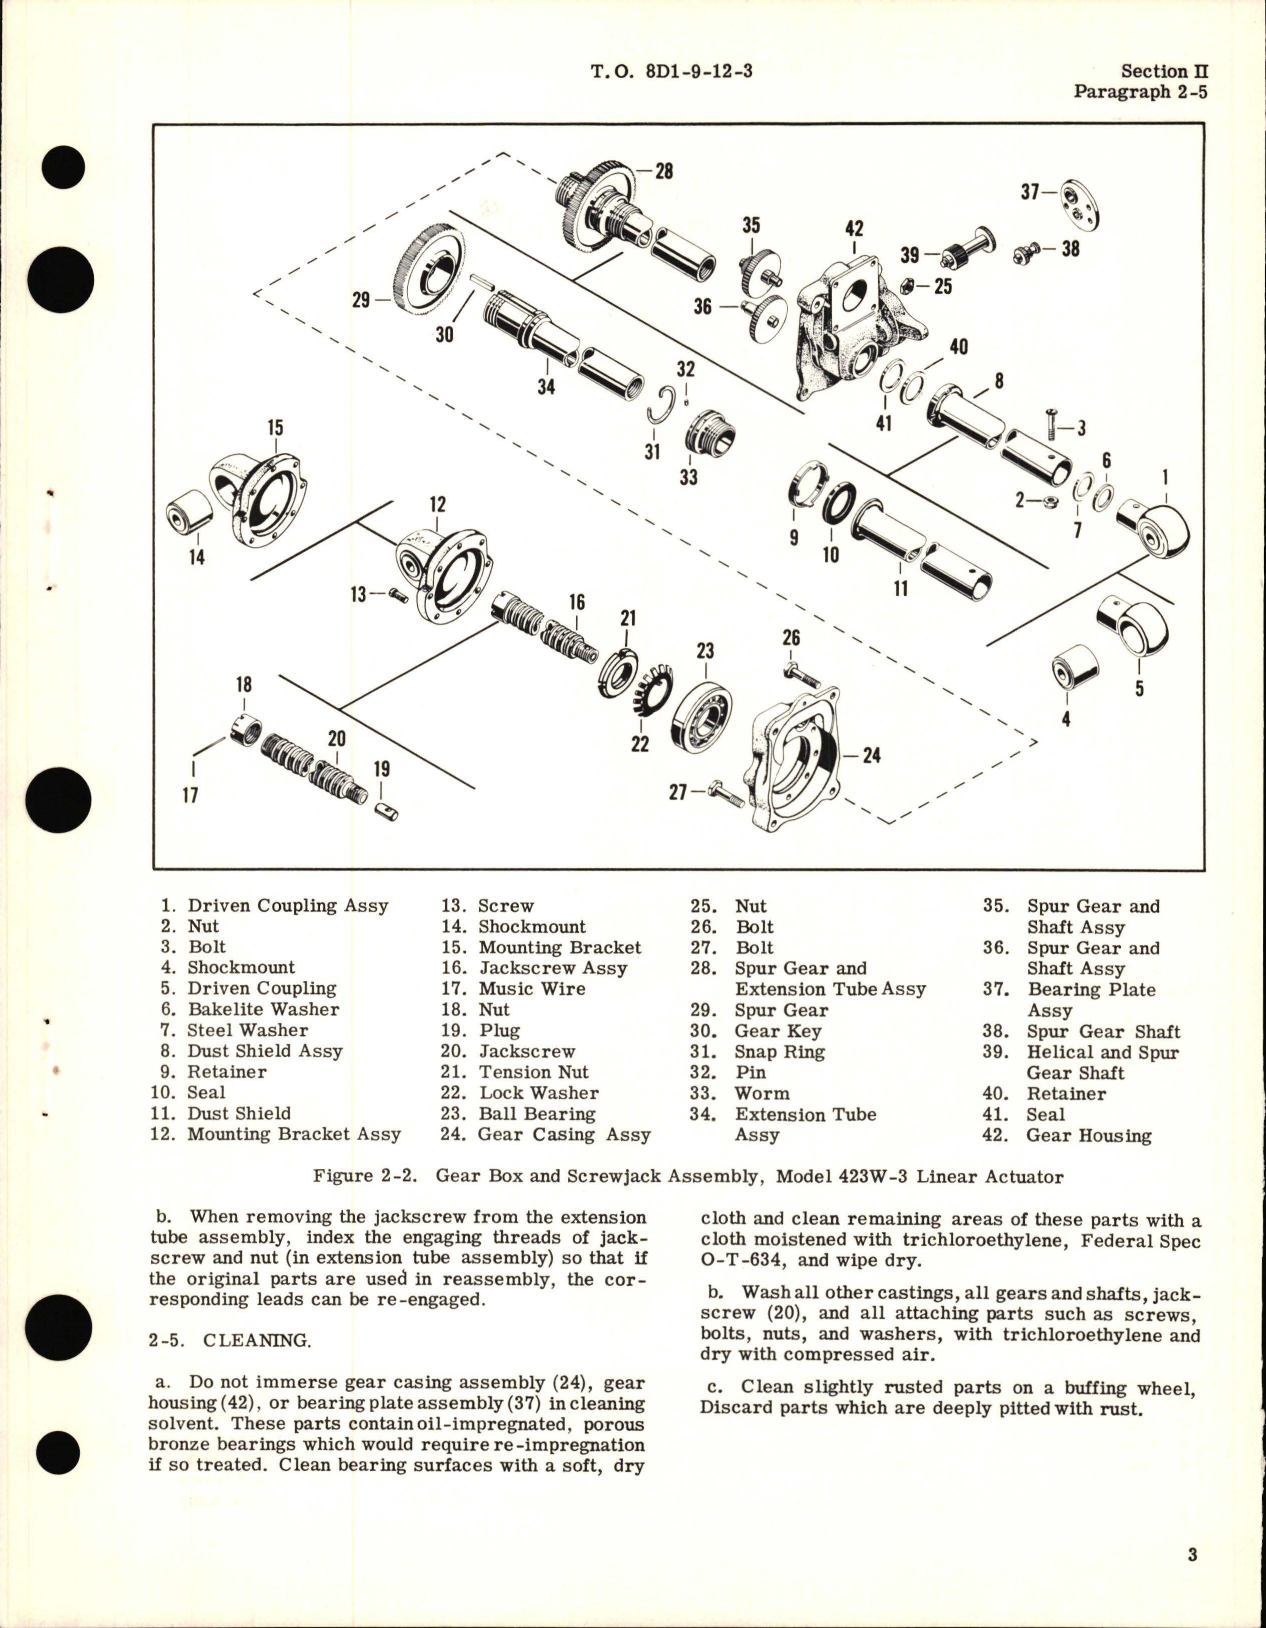 Sample page 5 from AirCorps Library document: Overhaul Instructions for Linear Actuator Assembly 423 Series